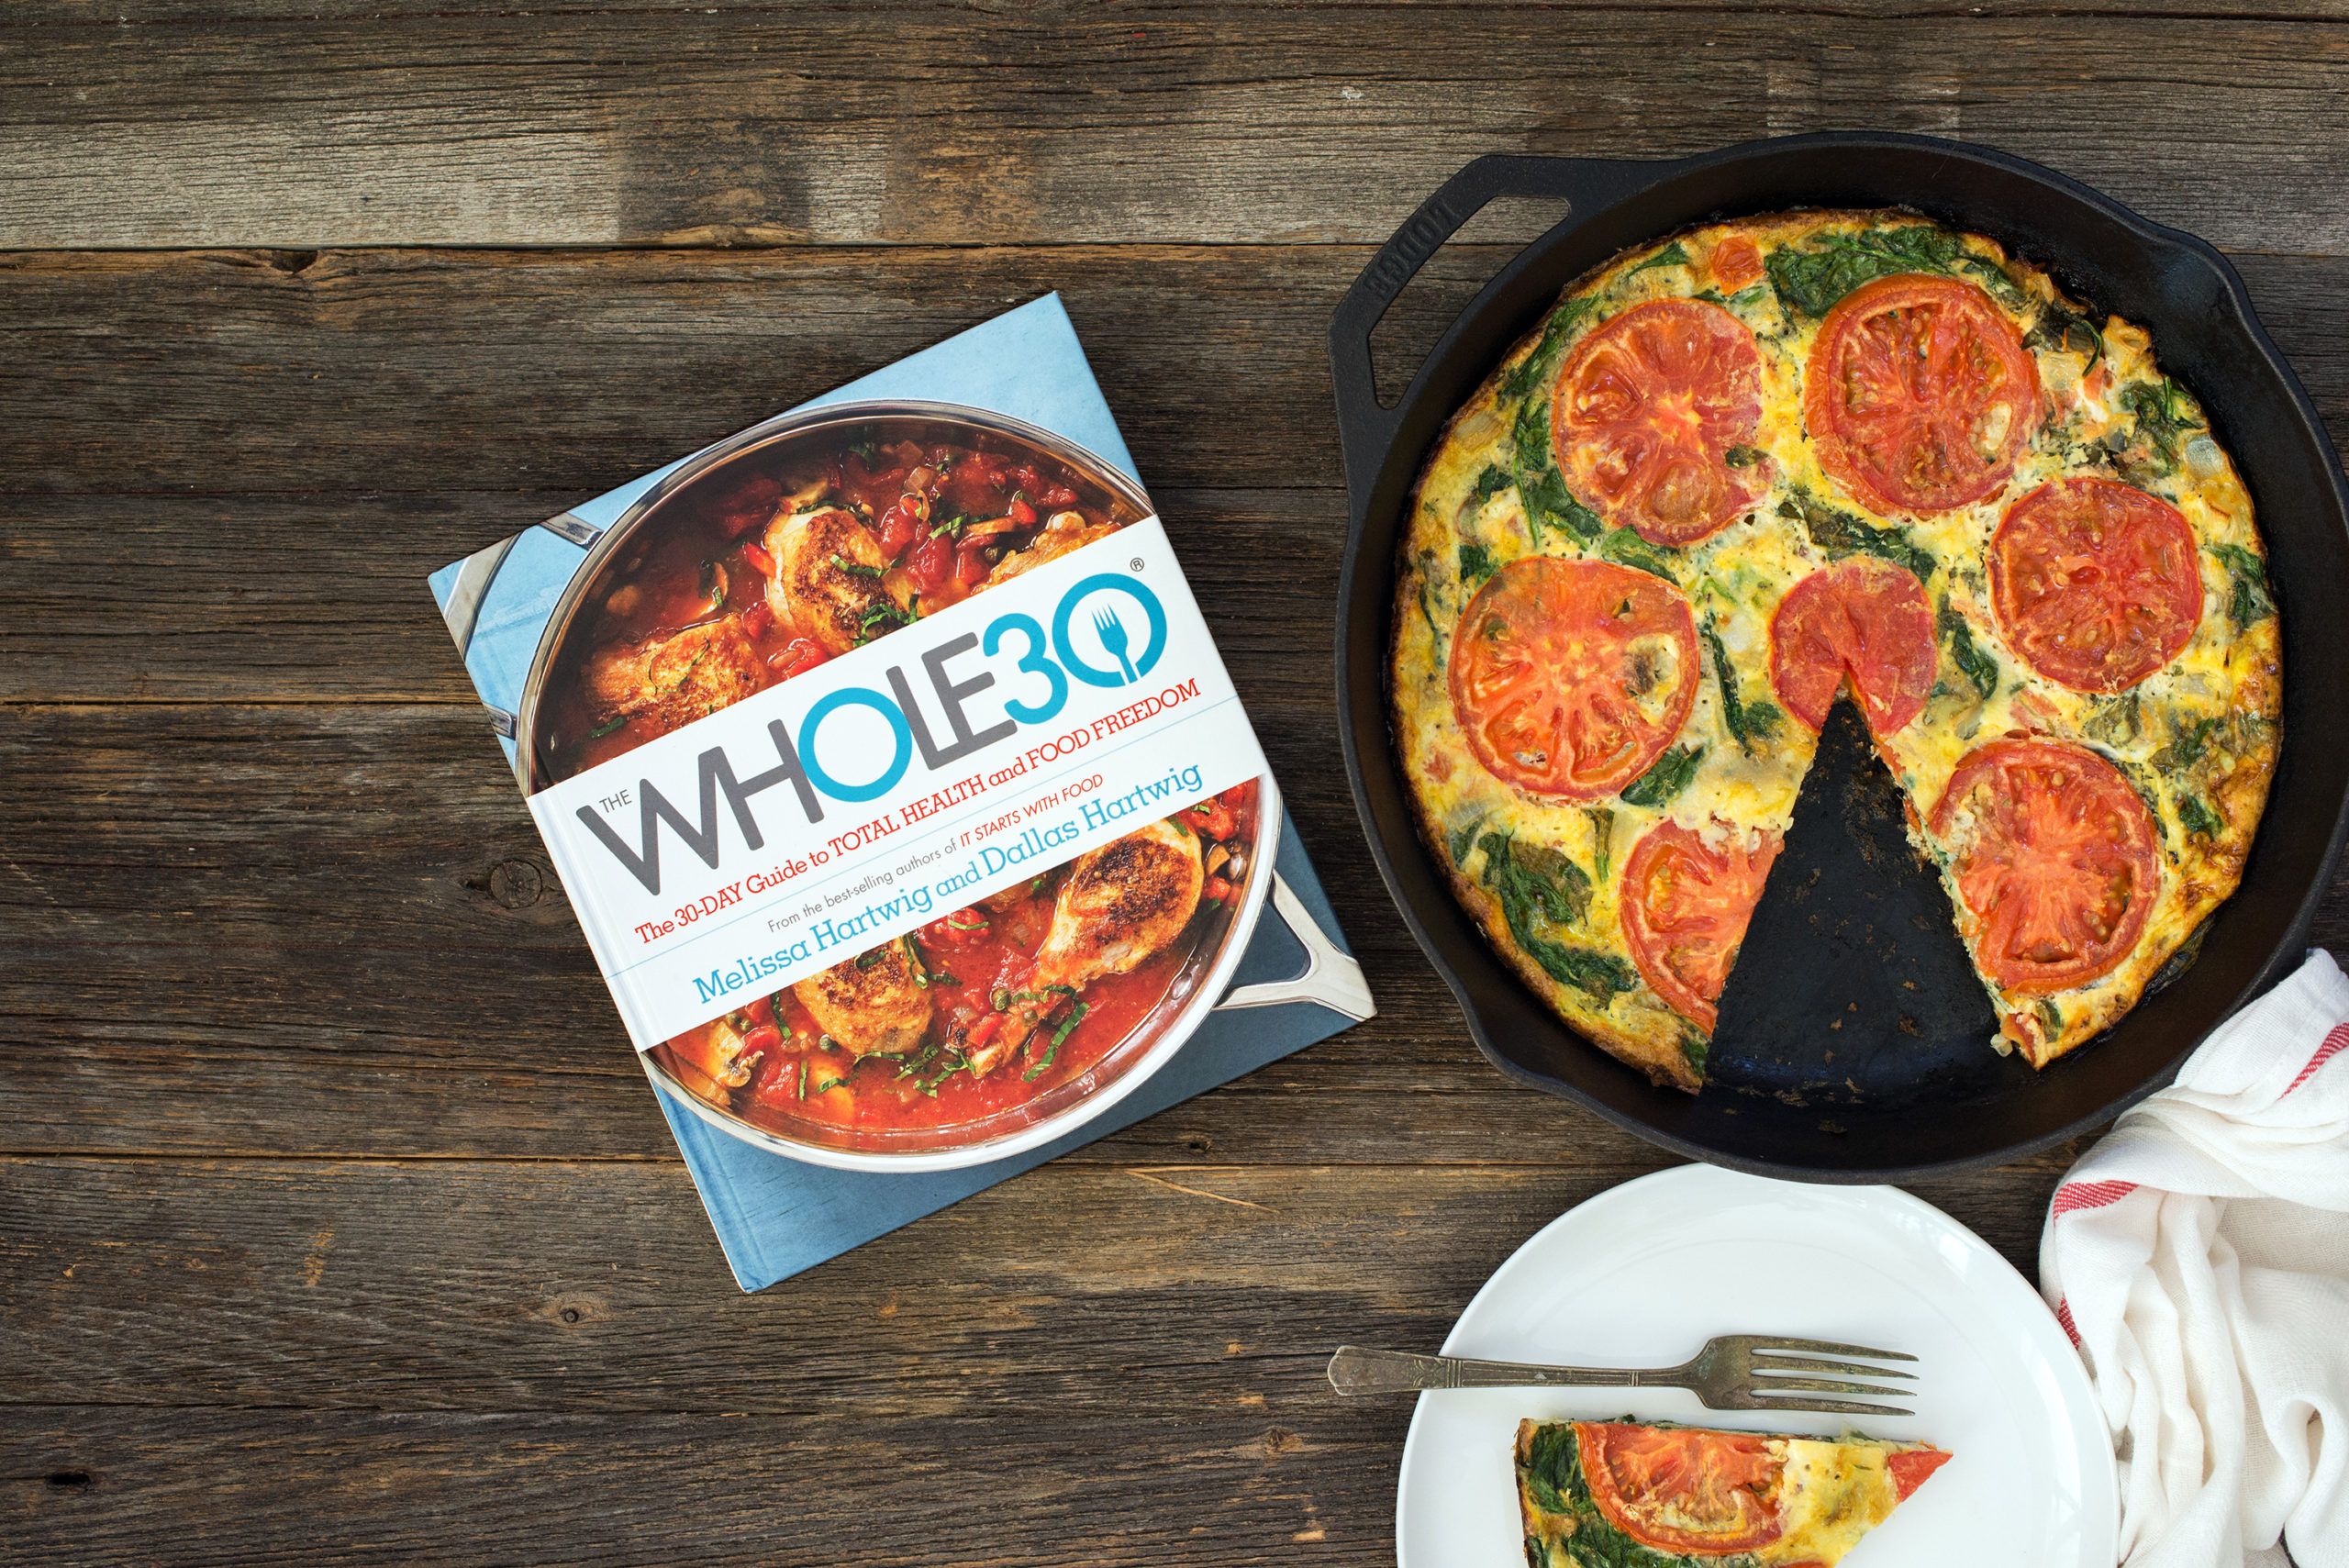 https://whole30.com/wp-content/uploads/2019/04/Whole30-book-w-frittata-for-Discover-page-scaled.jpg.optimal.jpg